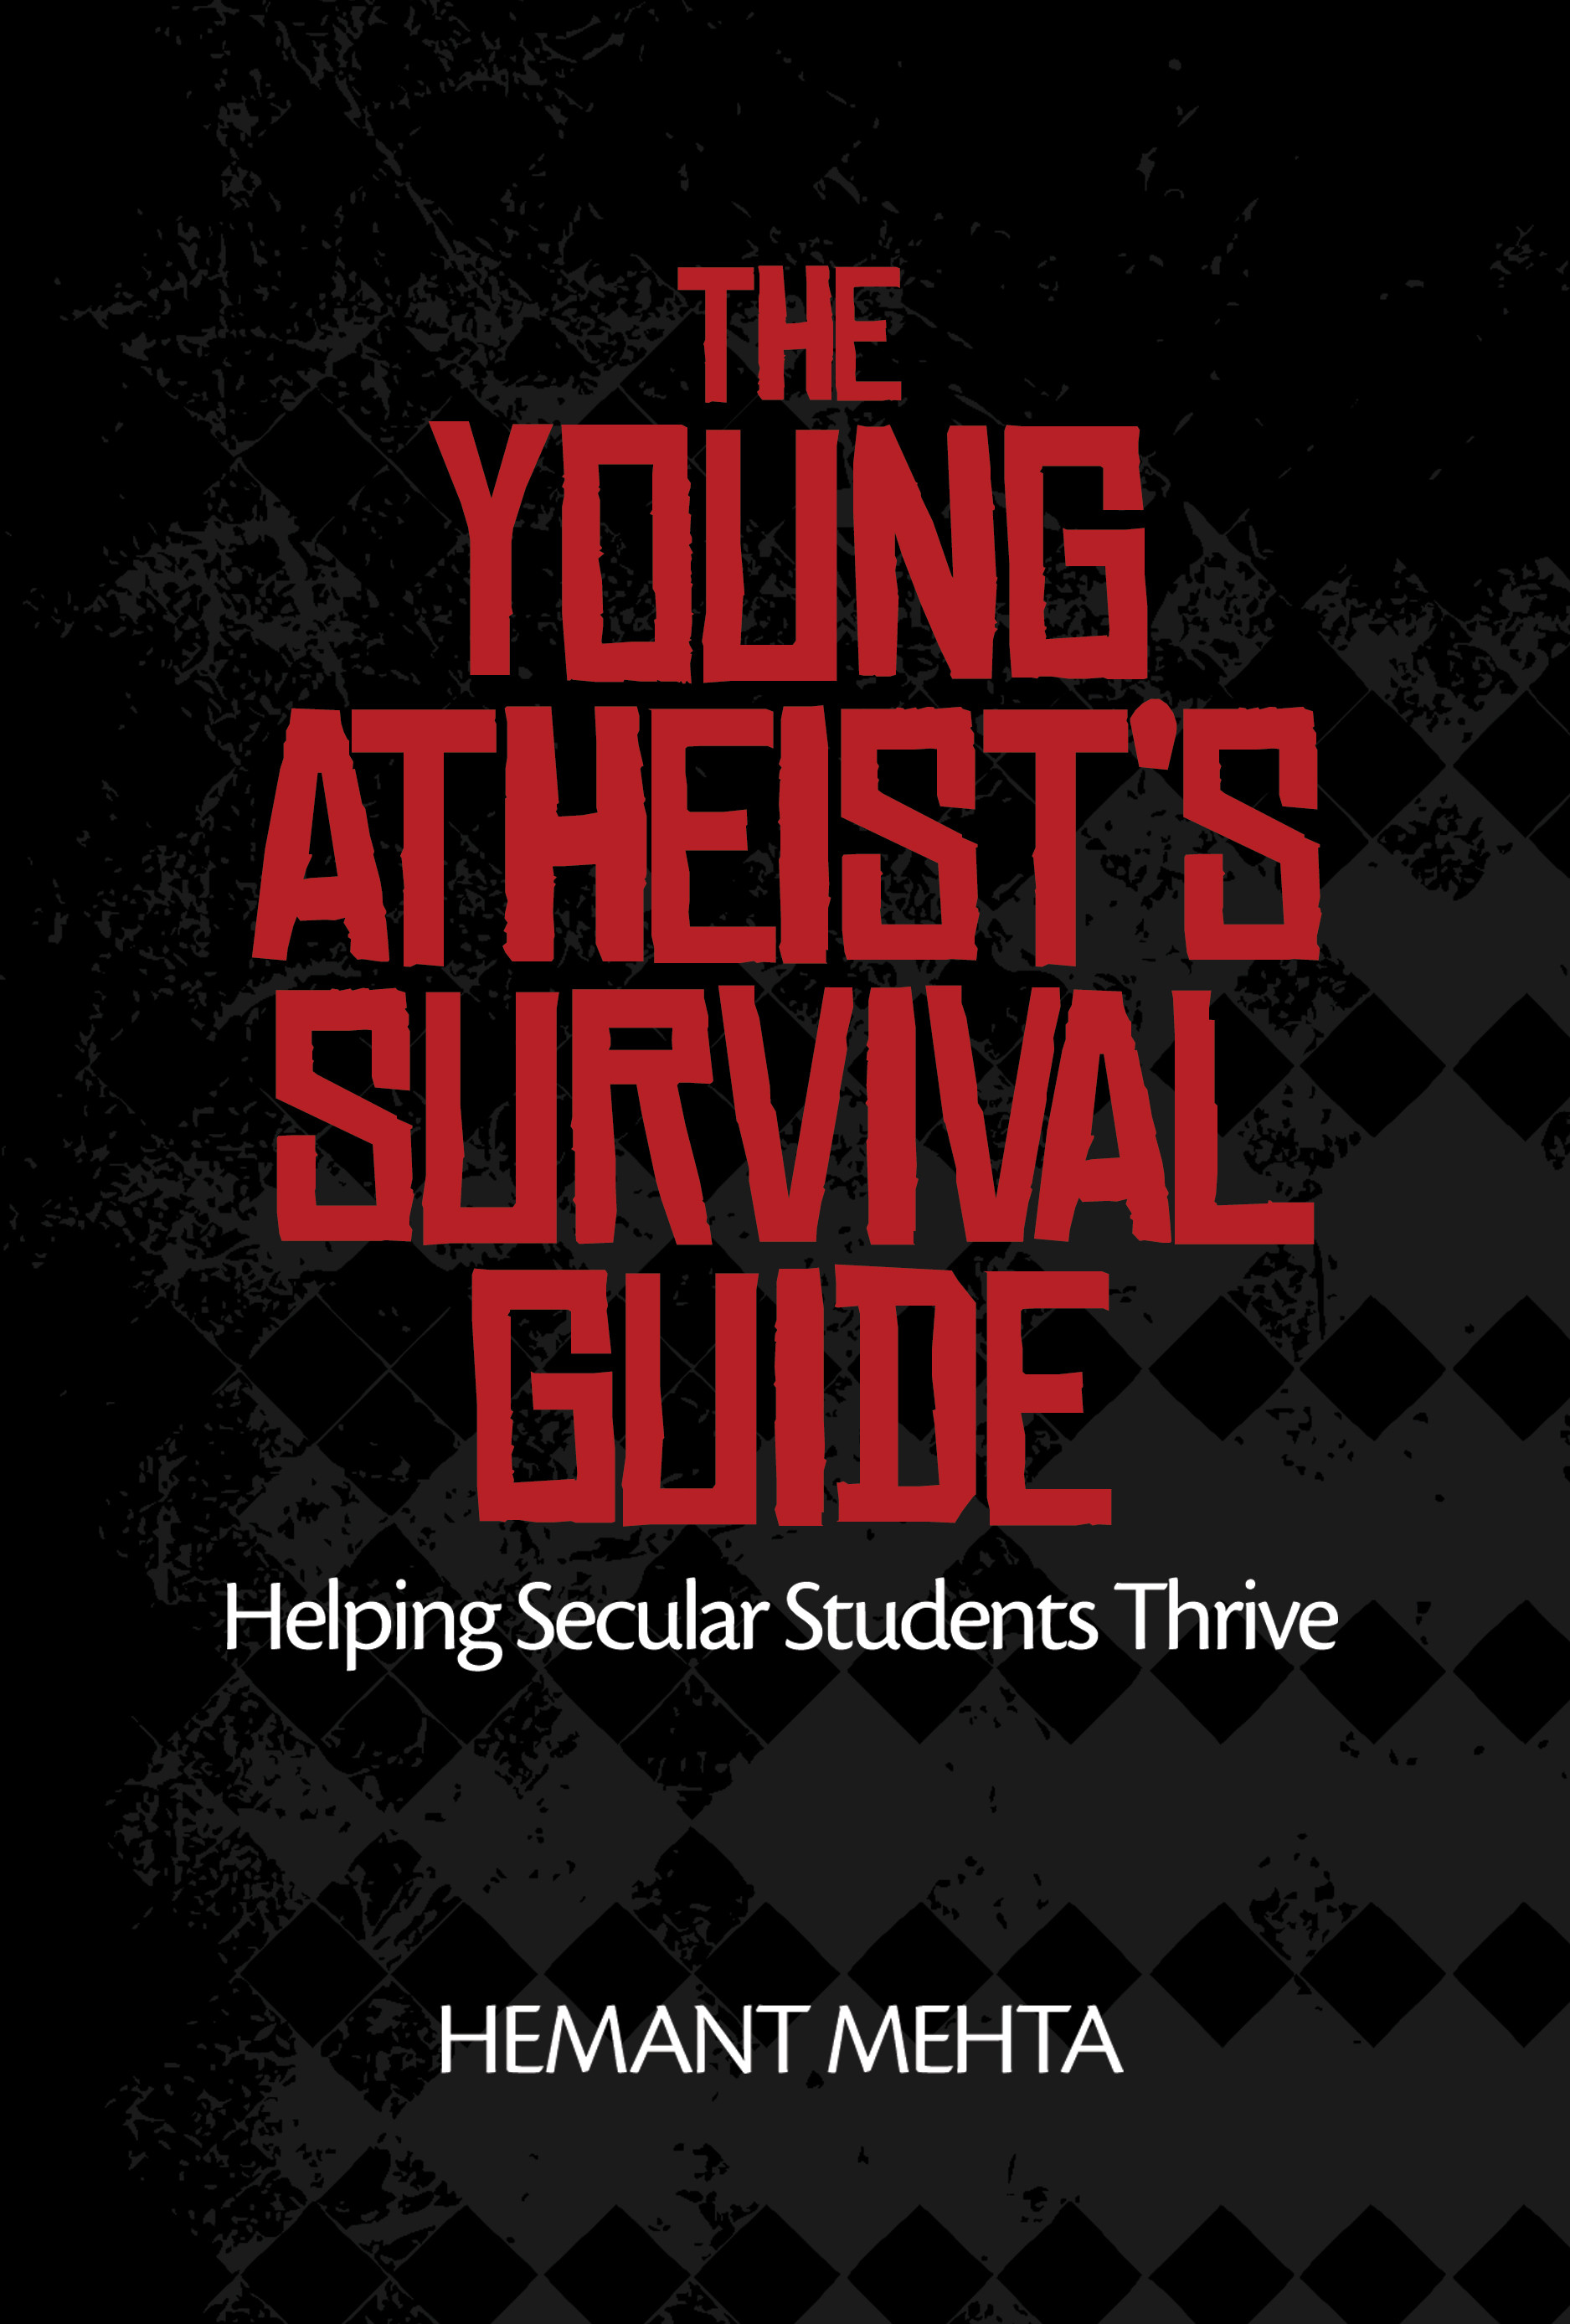 For a Limited Time, My Book <em>The Young Atheist’s Survival Guide</em> is Only $0.99